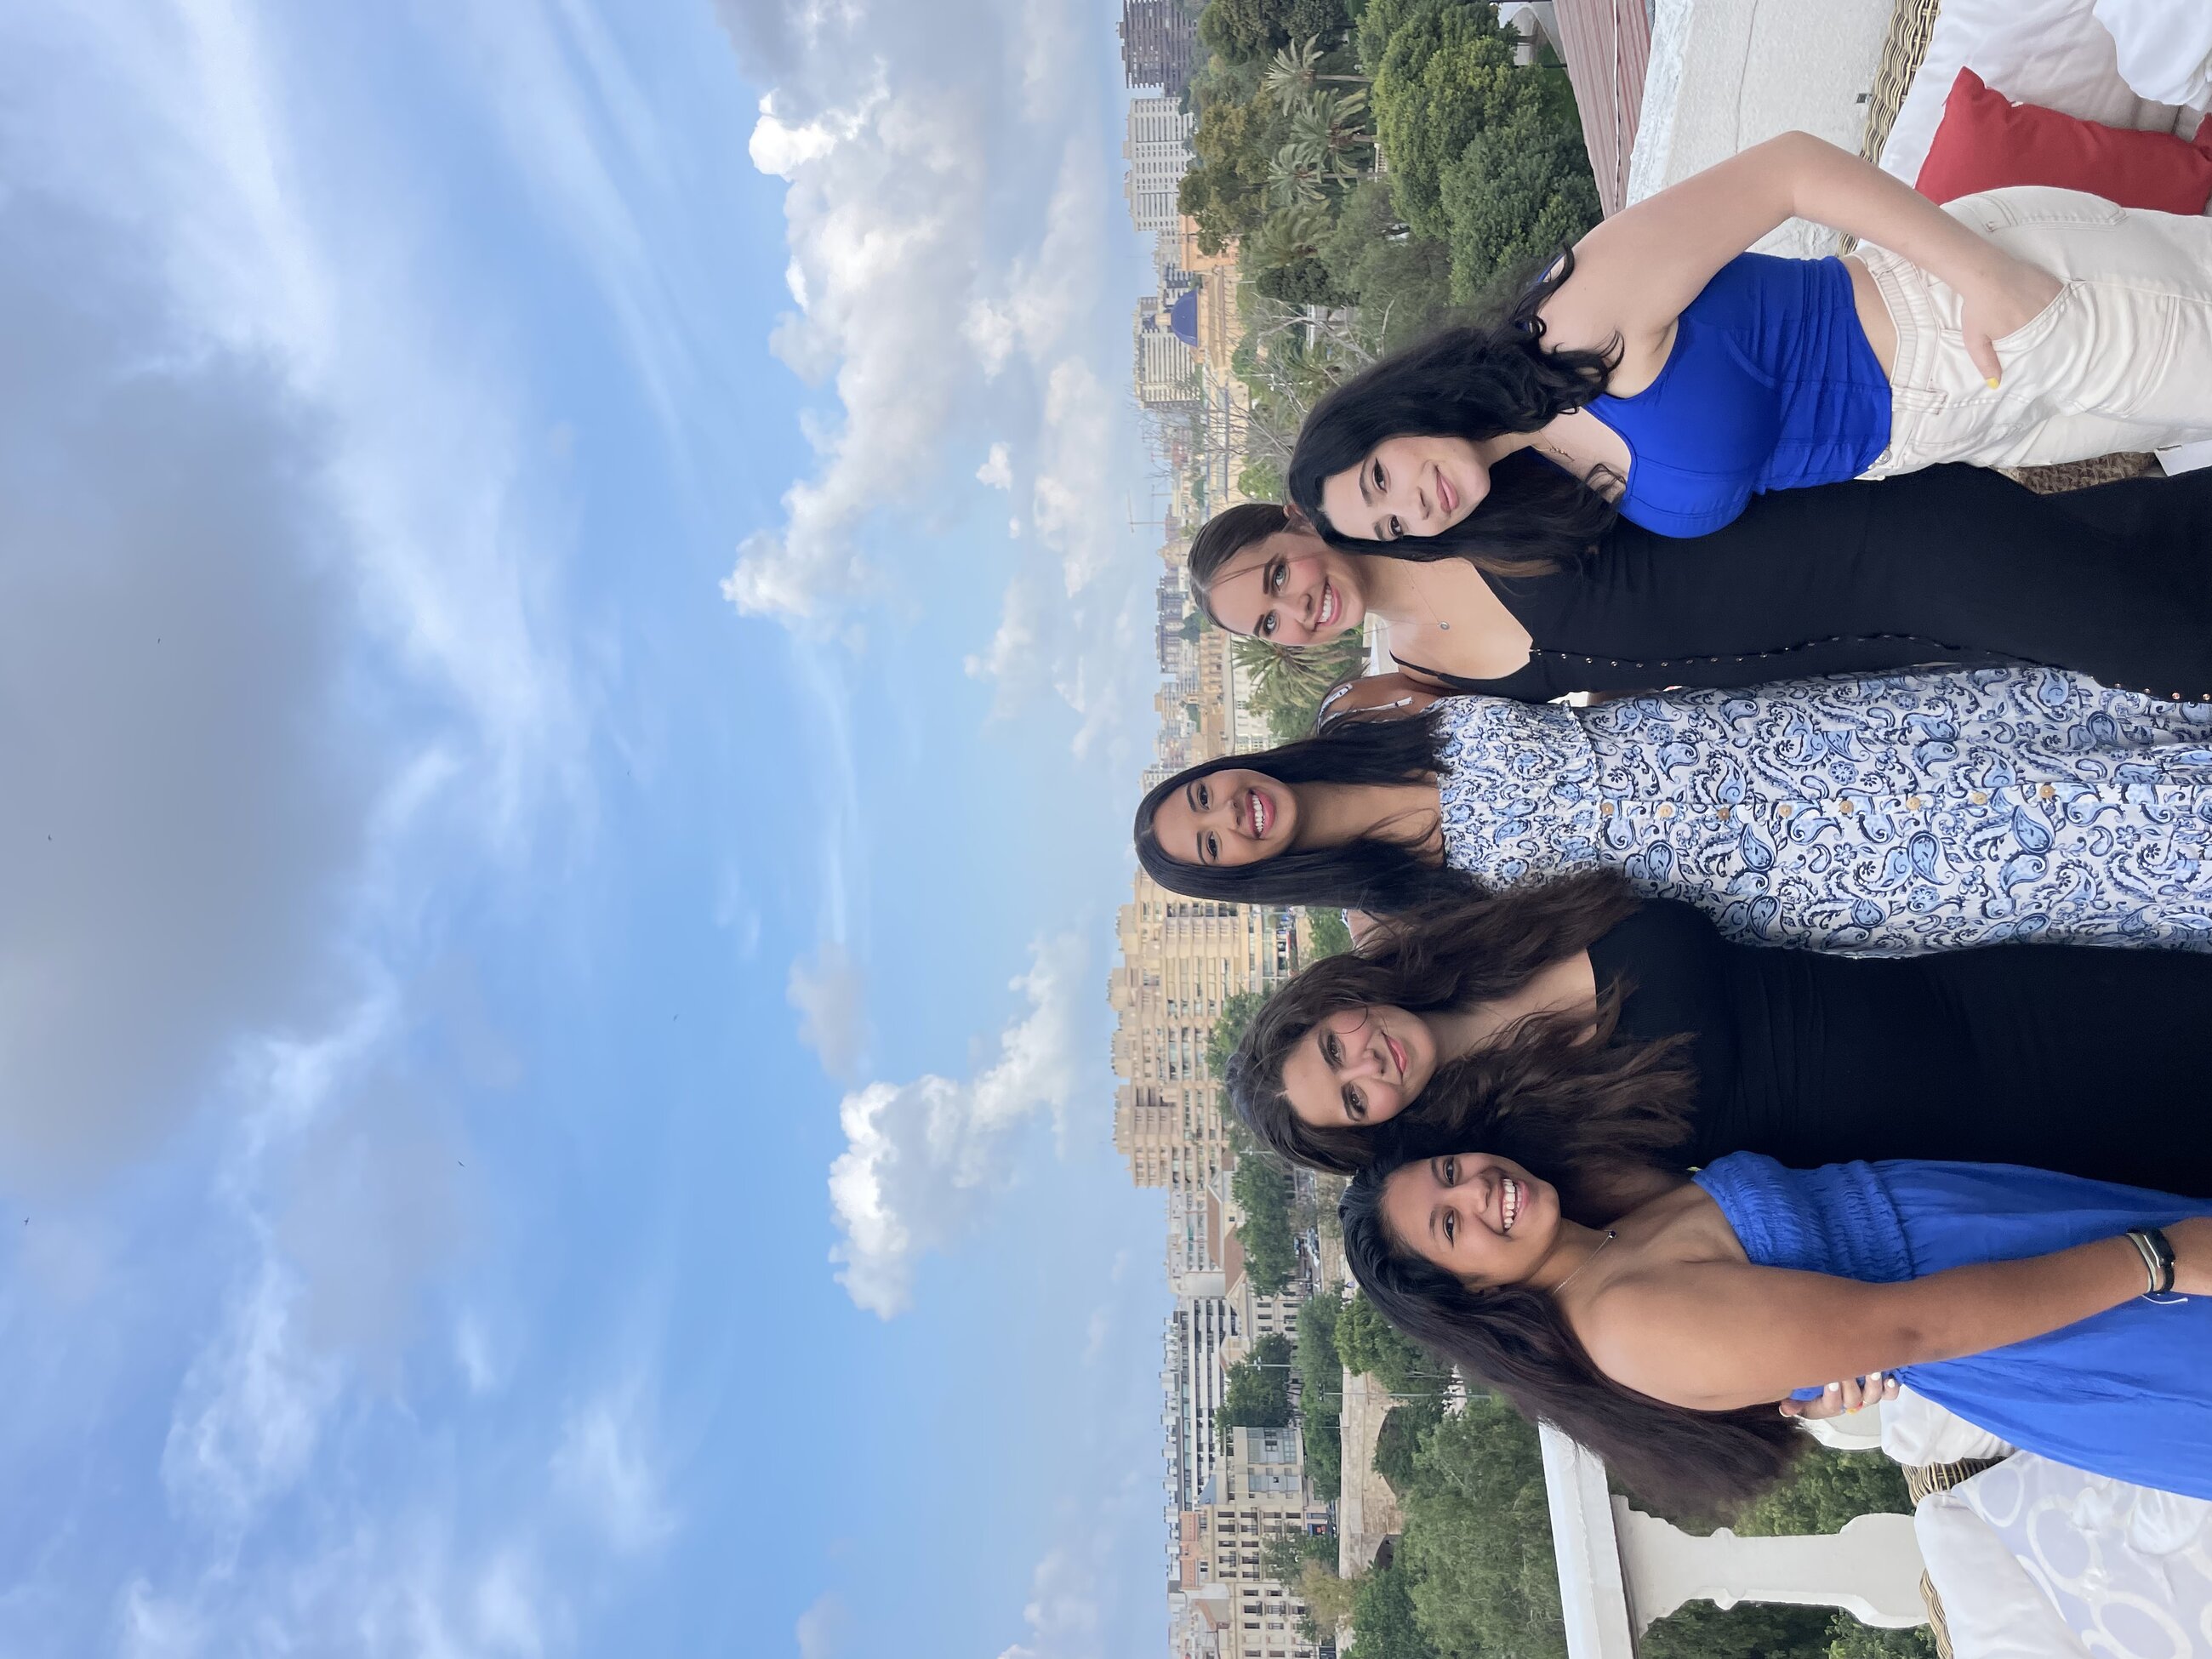 My friends and I enjoying happy hour on a rooftop terrace overlooking the city of Valencia